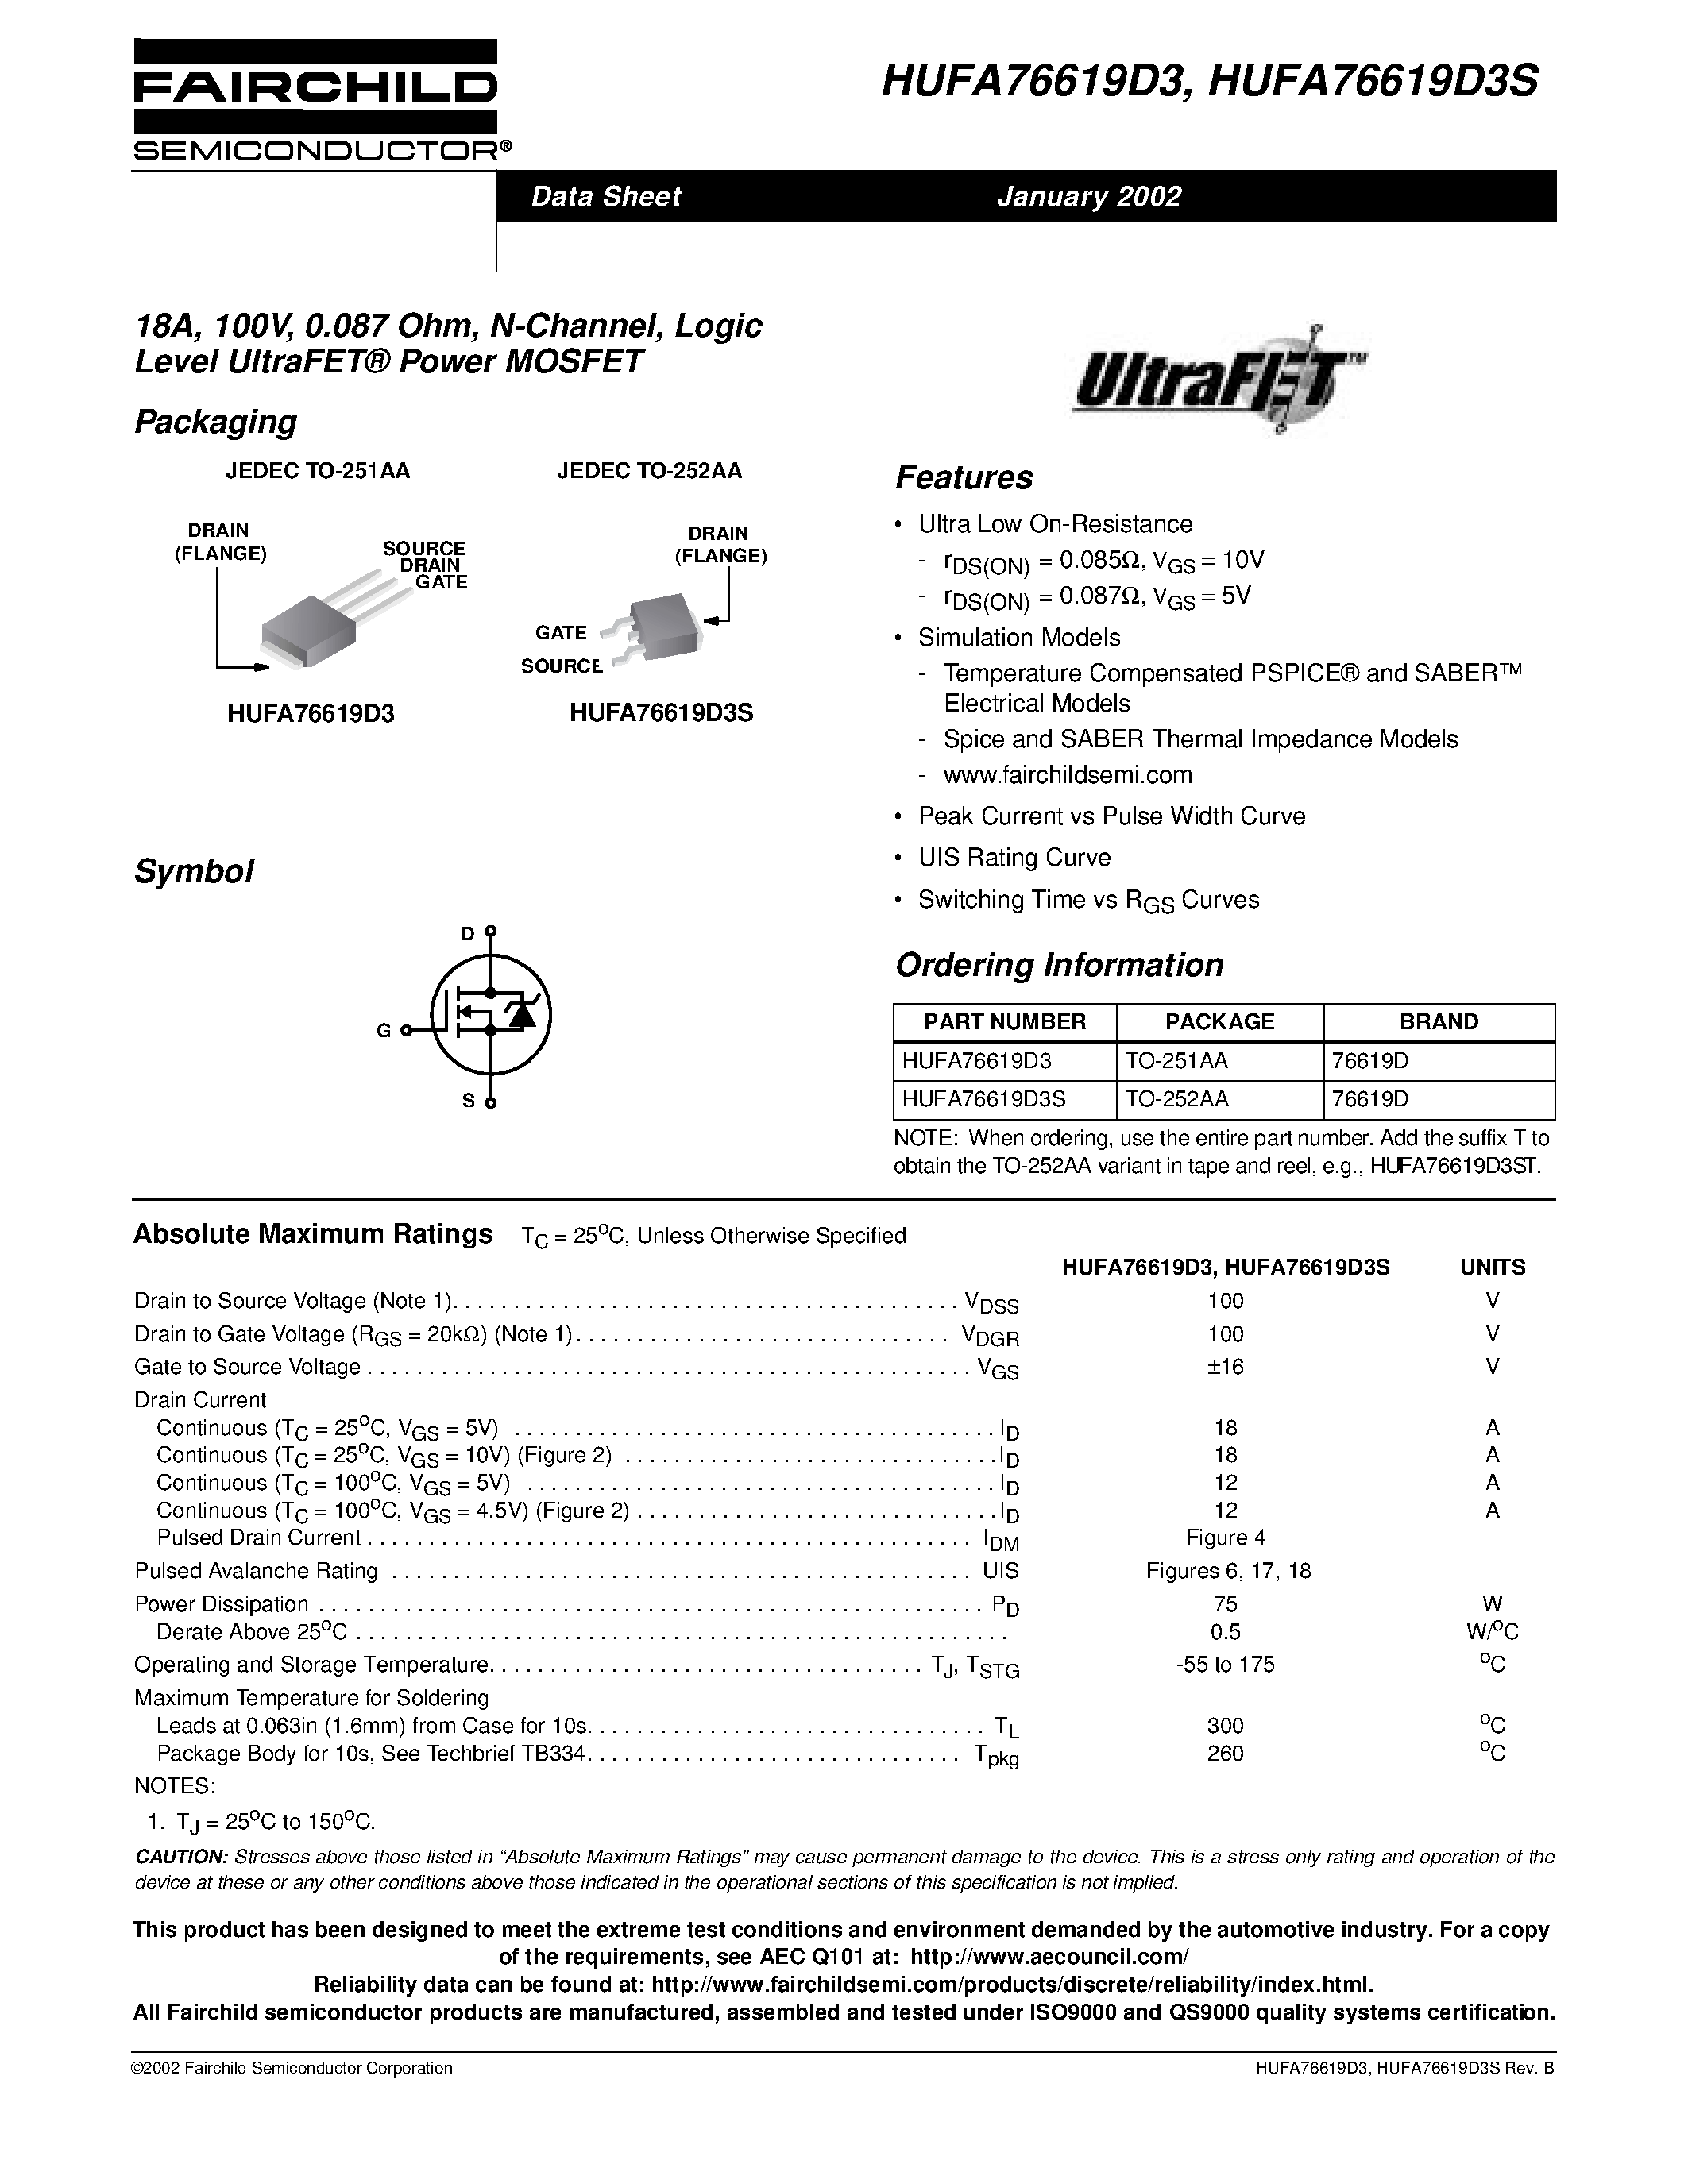 Datasheet HUFA76619D3 - 18A/ 100V/ 0.087 Ohm/ N-Channel/ Logic Level UltraFET Power MOSFET page 1